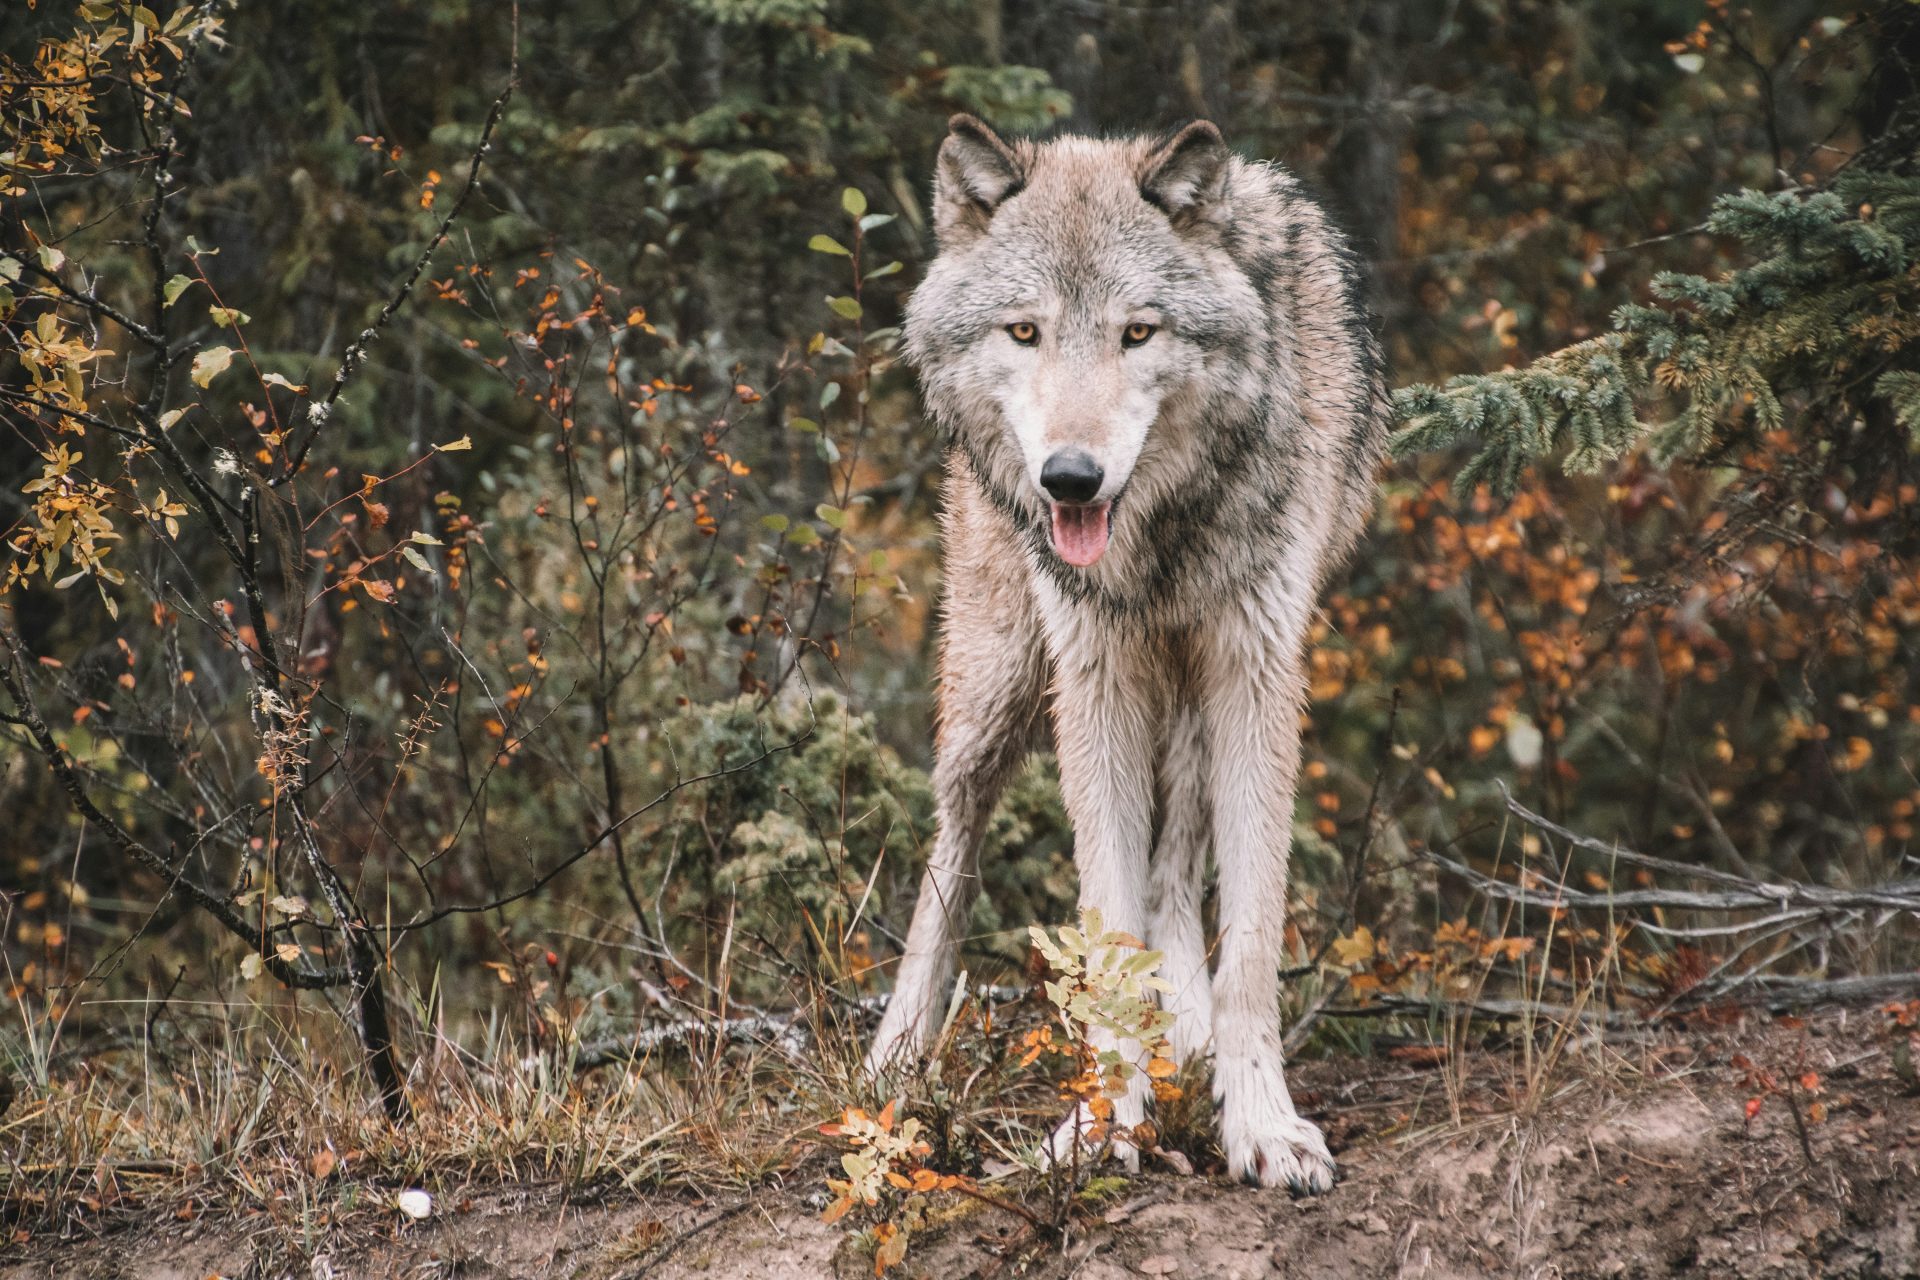 The gray wolves of Chernobyl